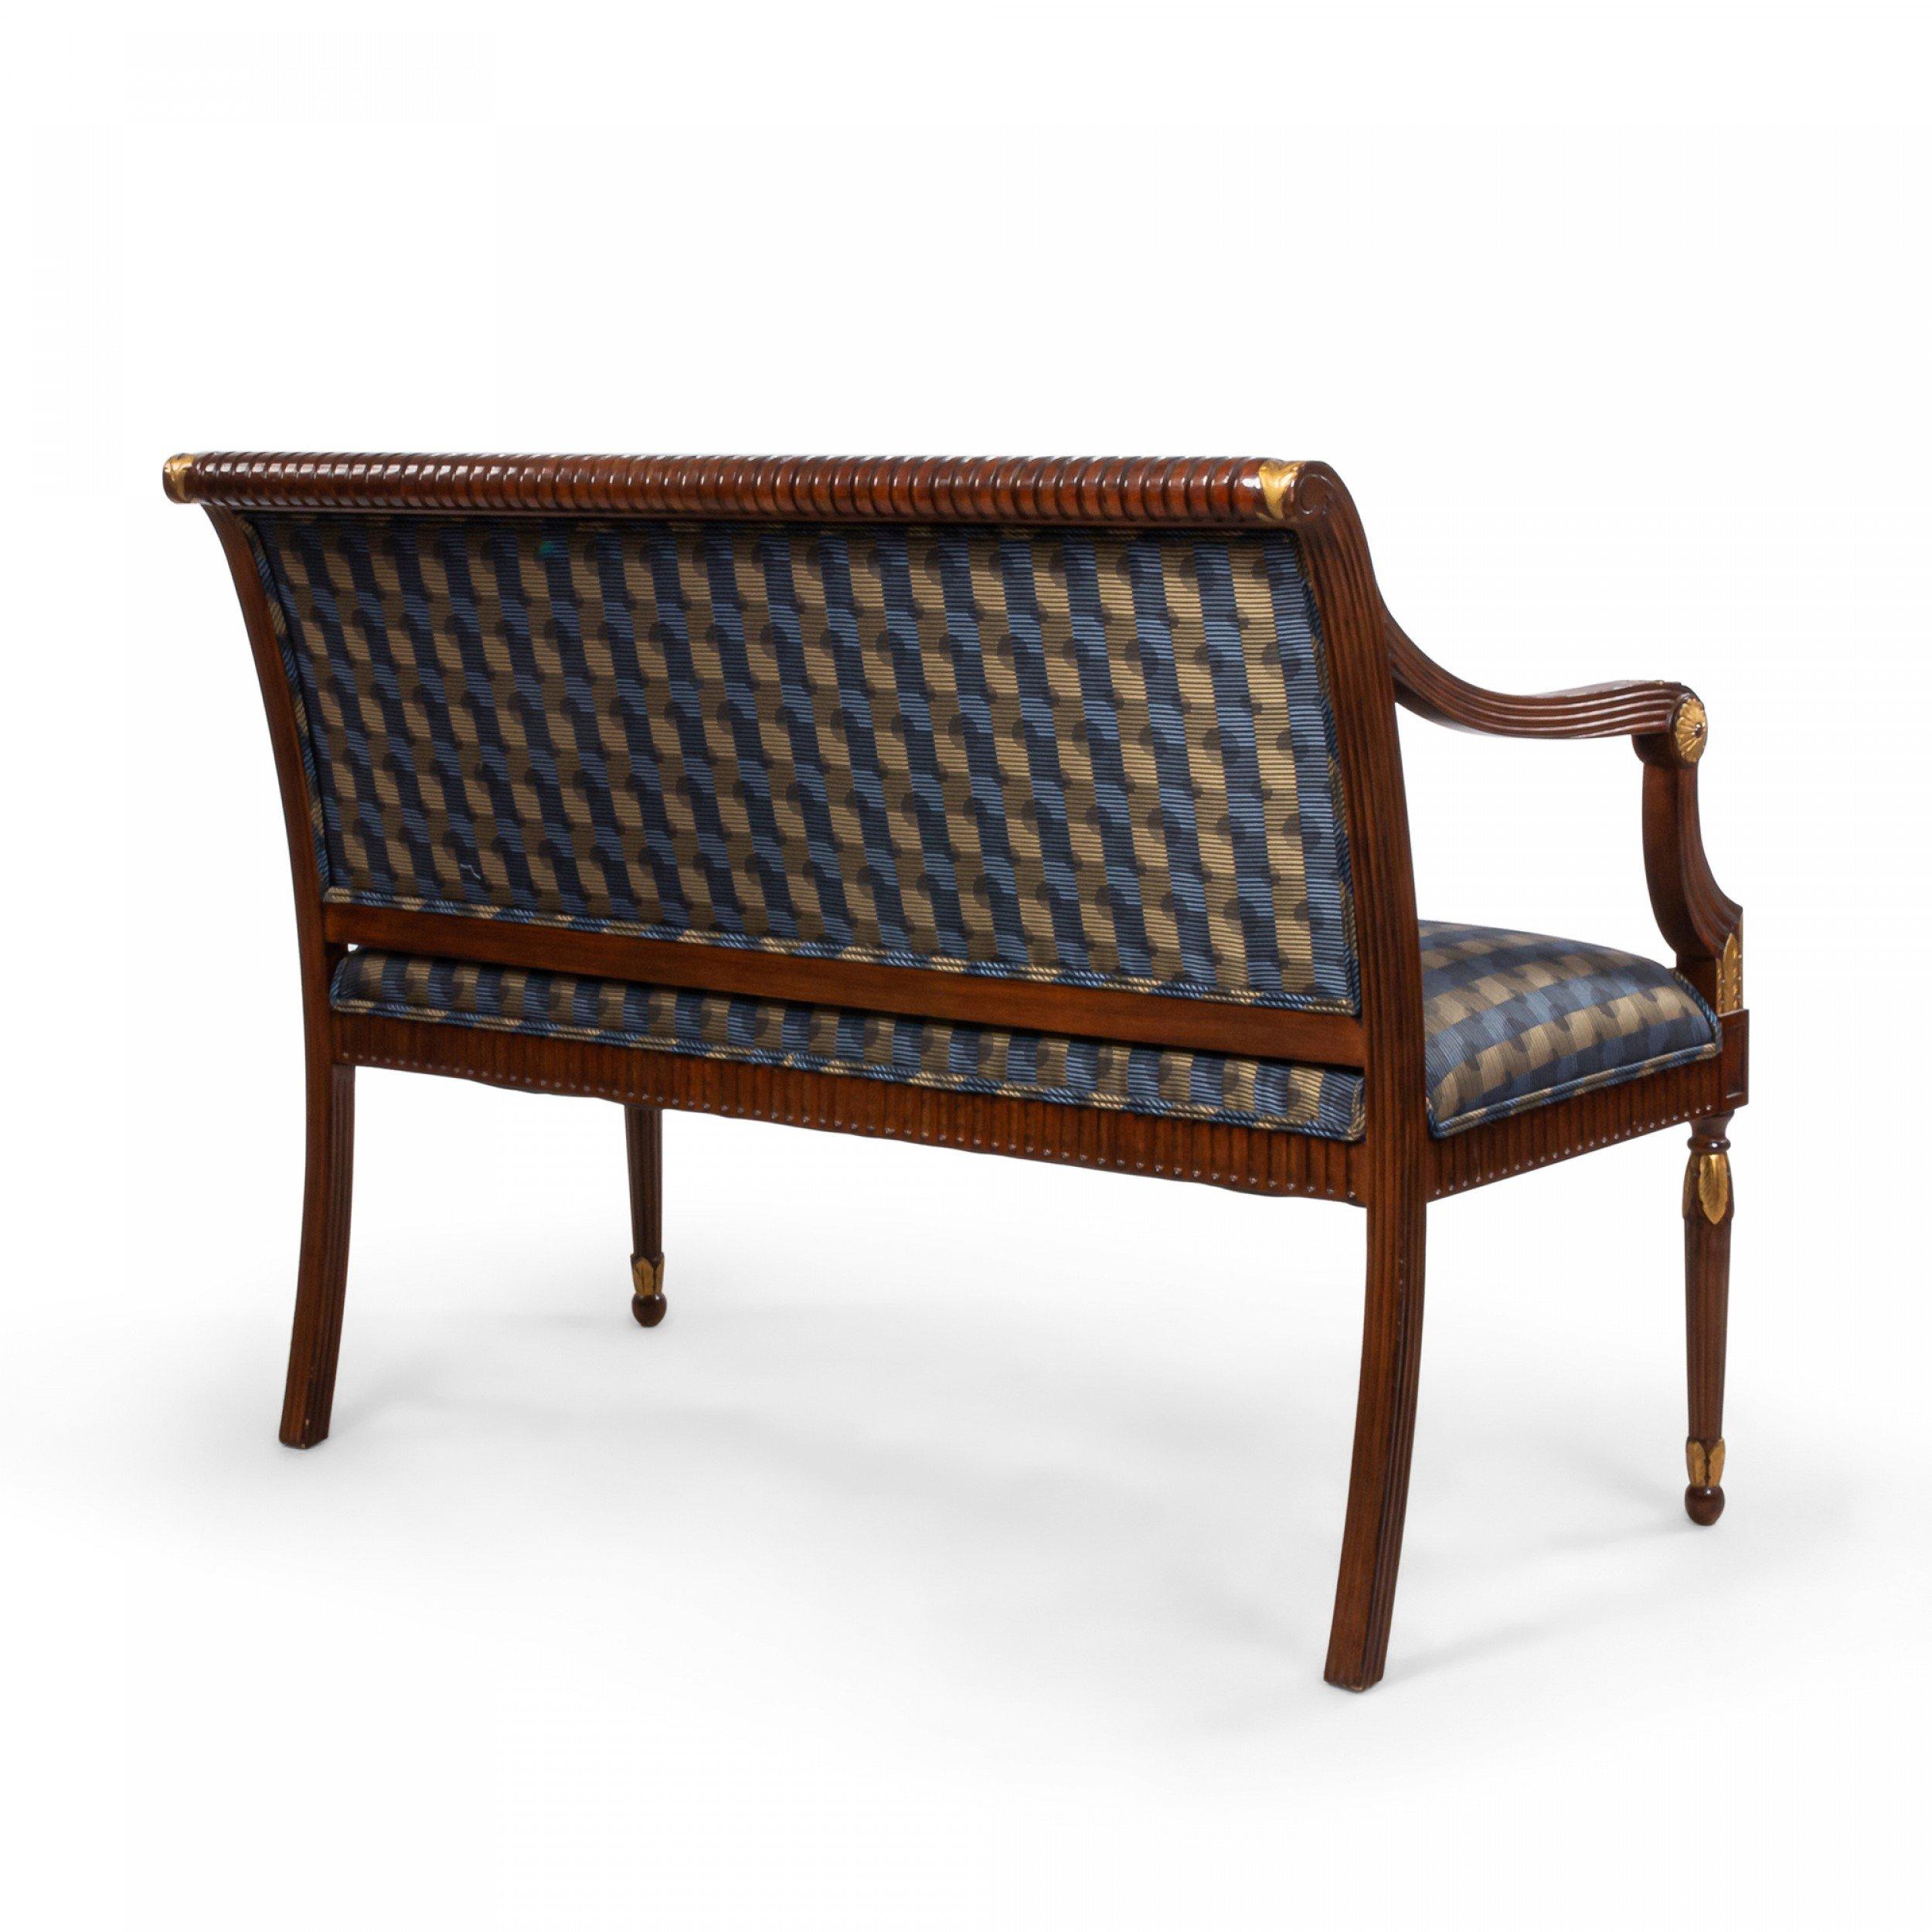 French Louis XVI Style Mahogany Settee with Blue Patterned Upholstery 1